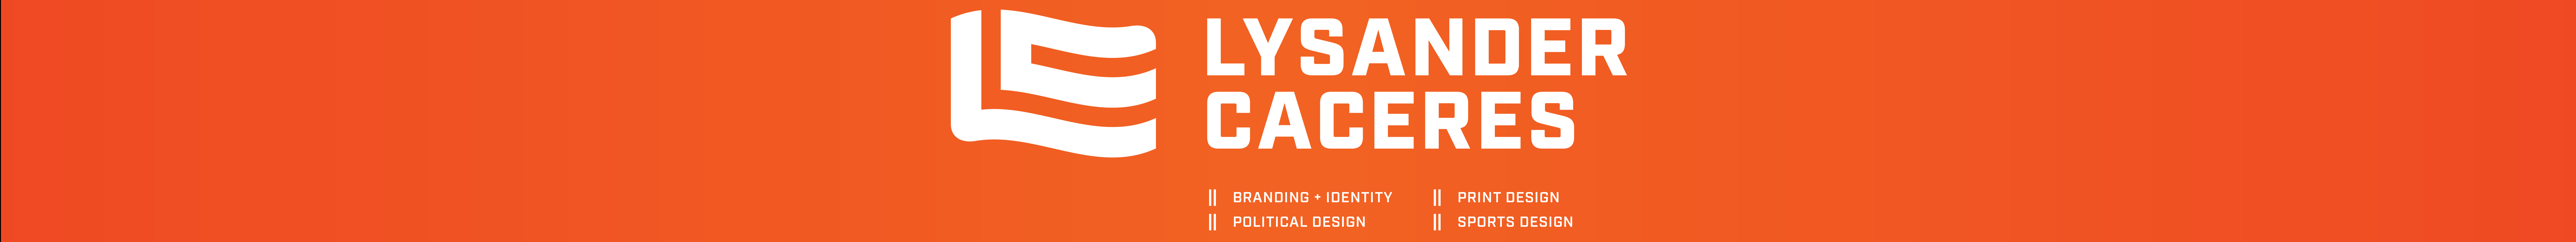 Lysander Caceres's profile banner